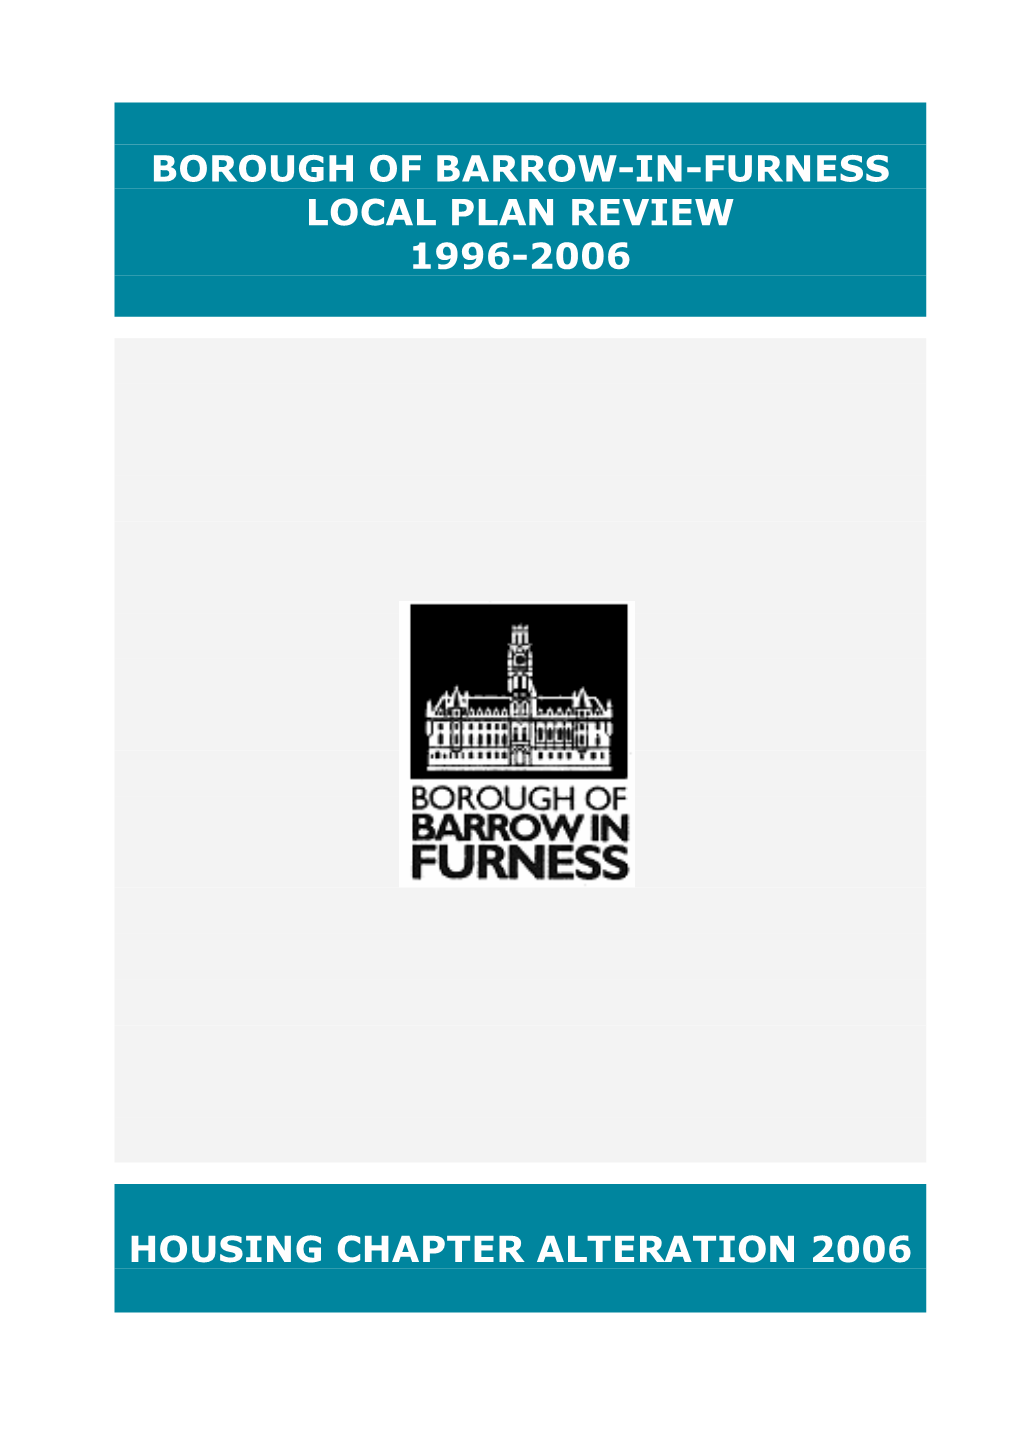 Borough of Barrow-In-Furness Local Plan Review 1996-2006